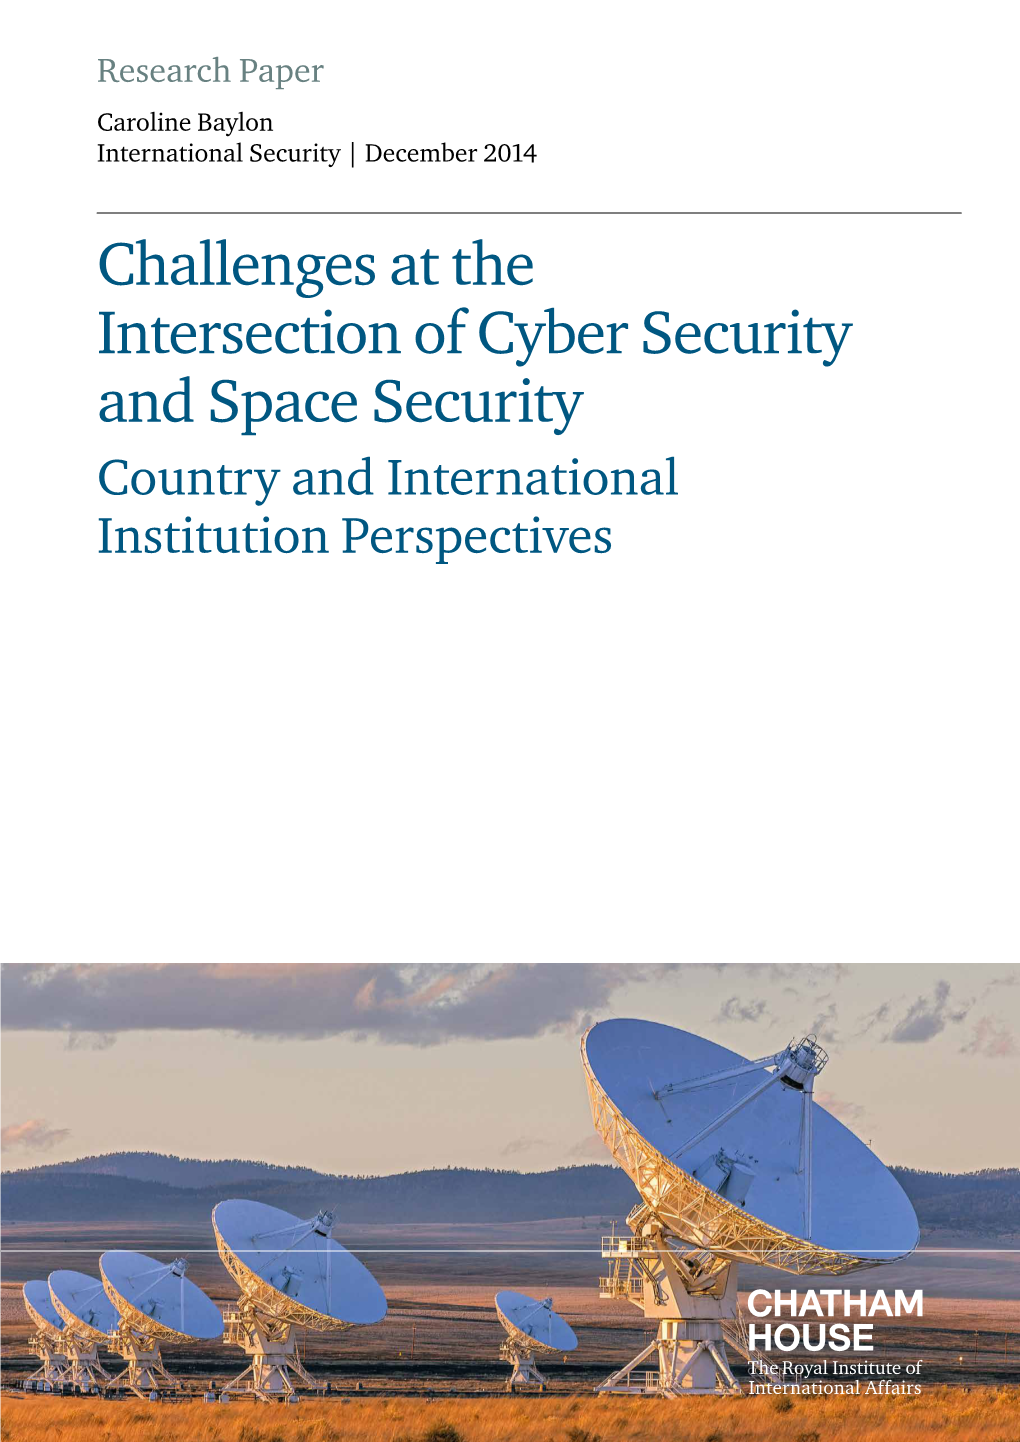 Challenges at the Intersection of Cyber Security and Space Security Country and International Institution Perspectives Caroline Baylon Chatham House Chatham Contents